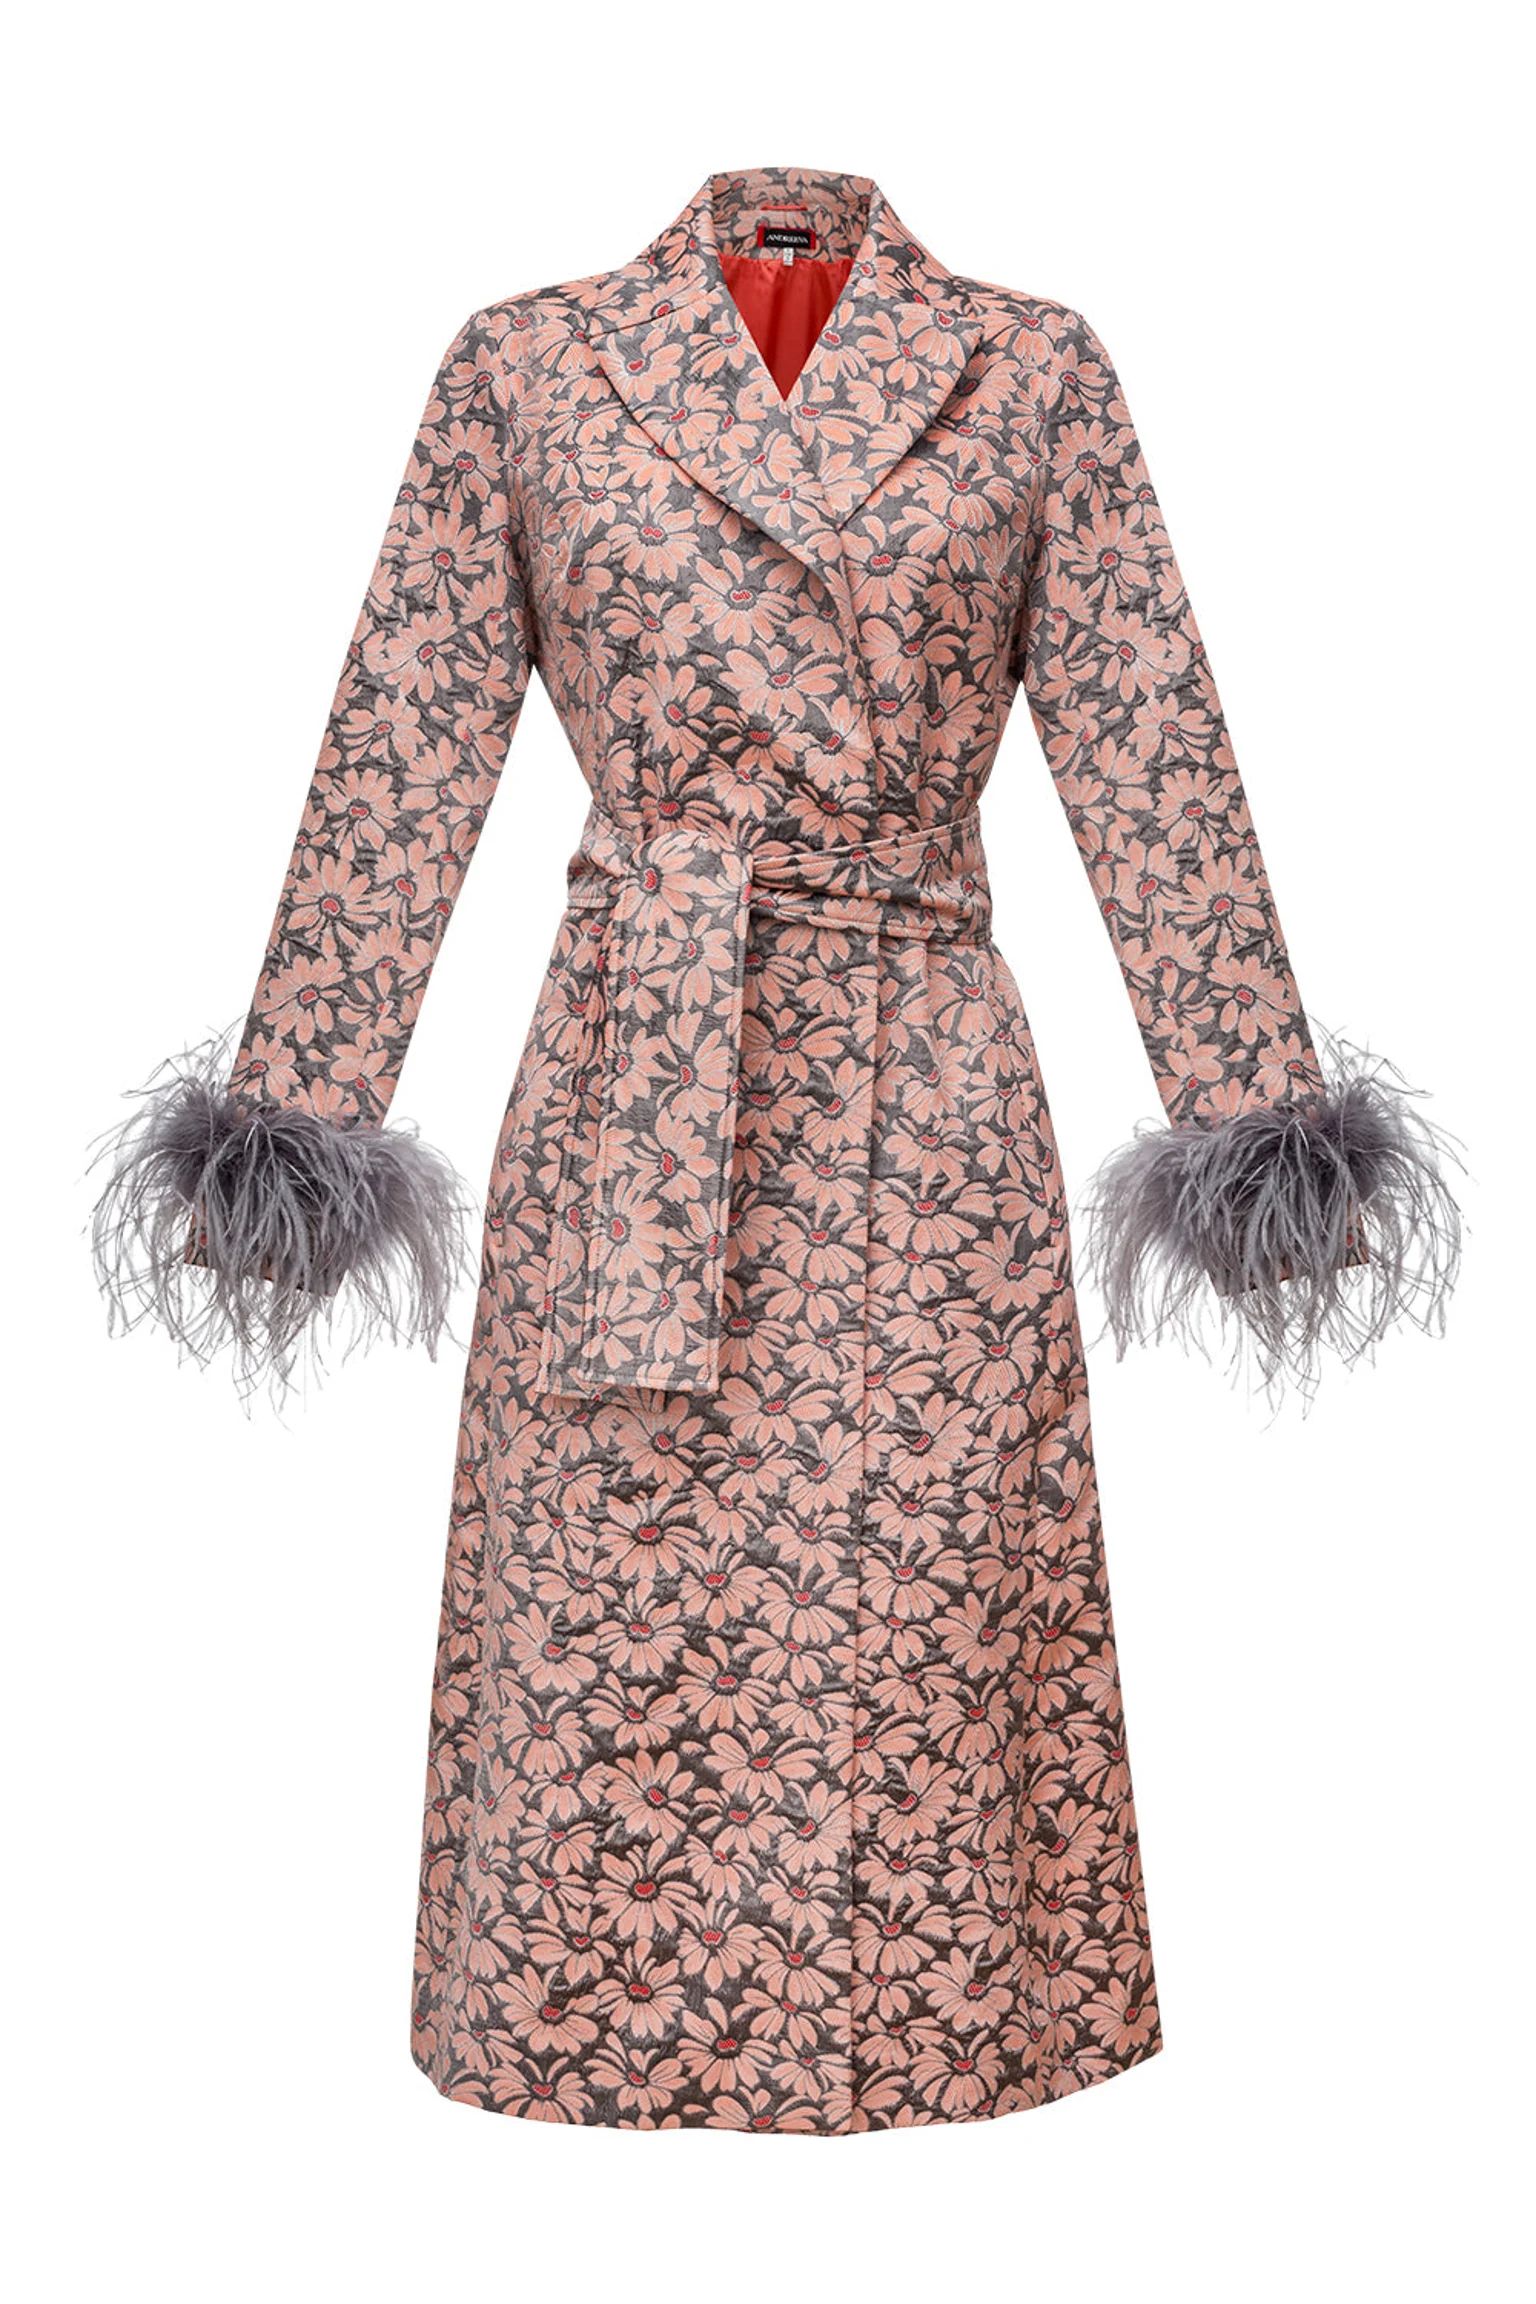 Andreeva Jacqueline Coat №22 With Detachable Feathers Cuffs | Verishop